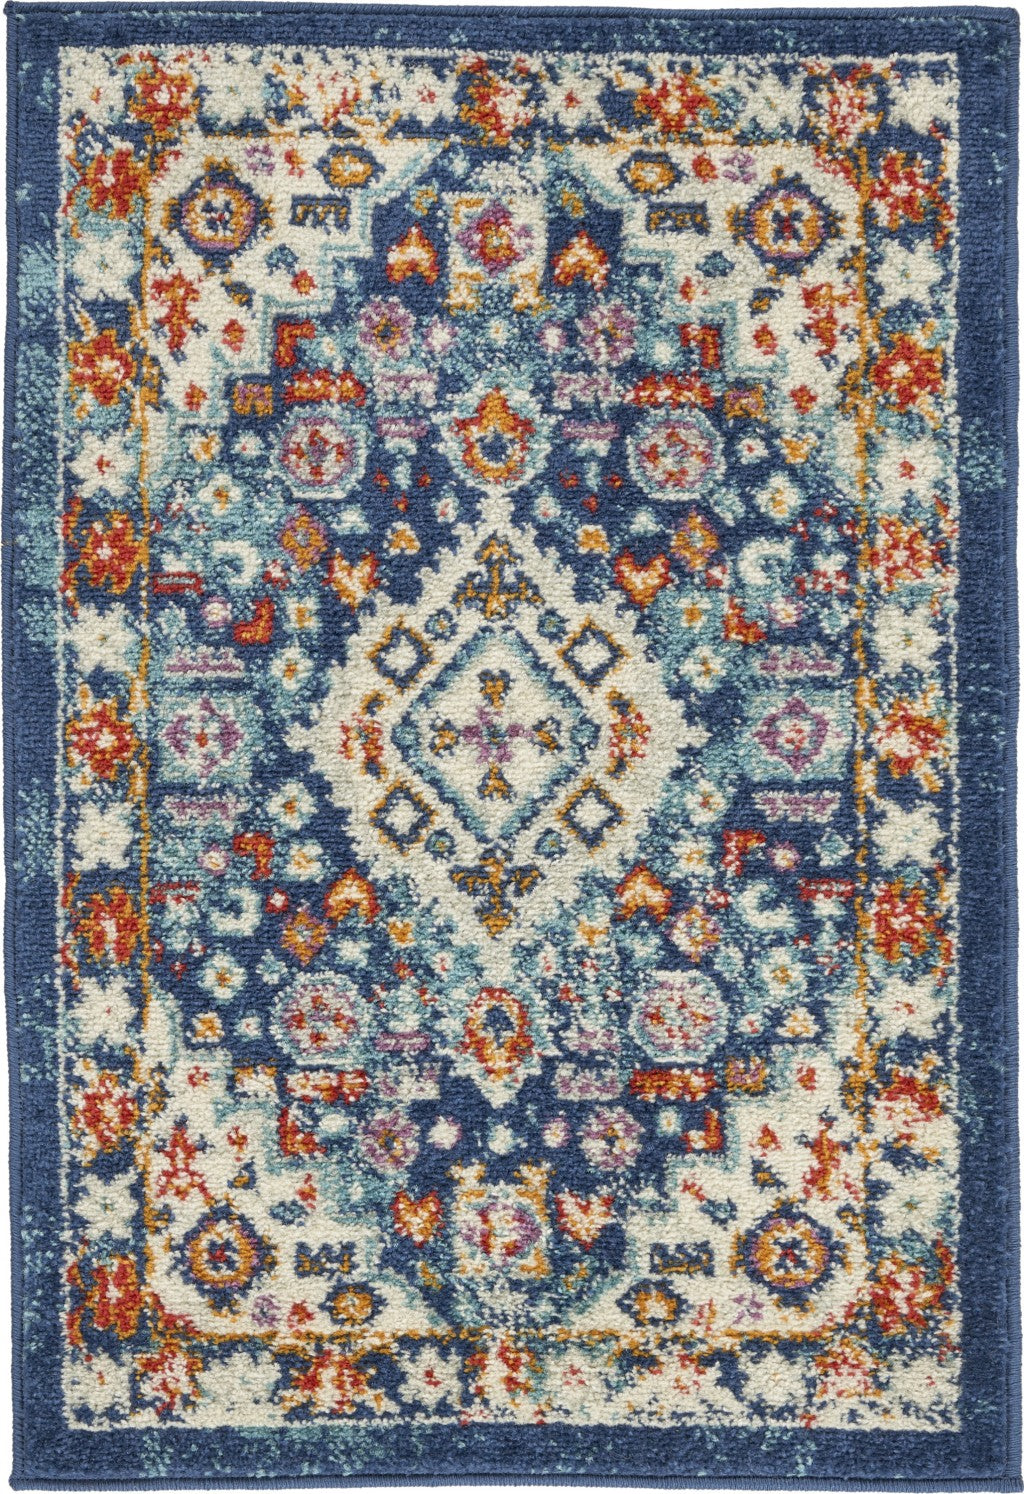 2’ X 3’ Blue And Ivory Medallion Scatter Rug - 99fab 